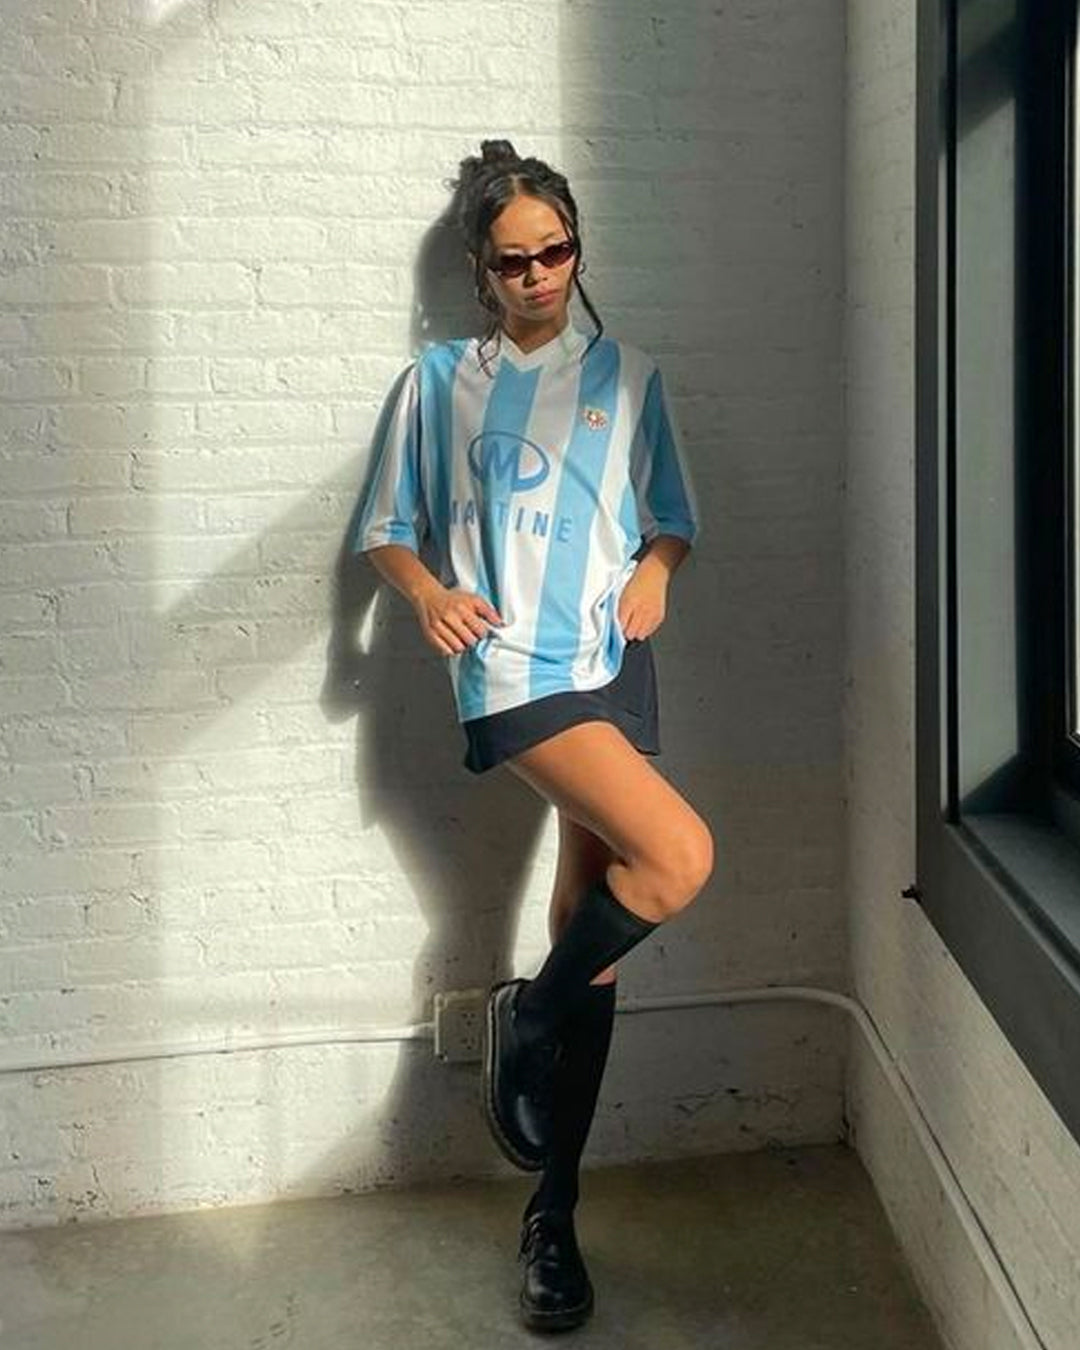 Football and Fashion: The Rise of Vintage Football Shirts in Fashion